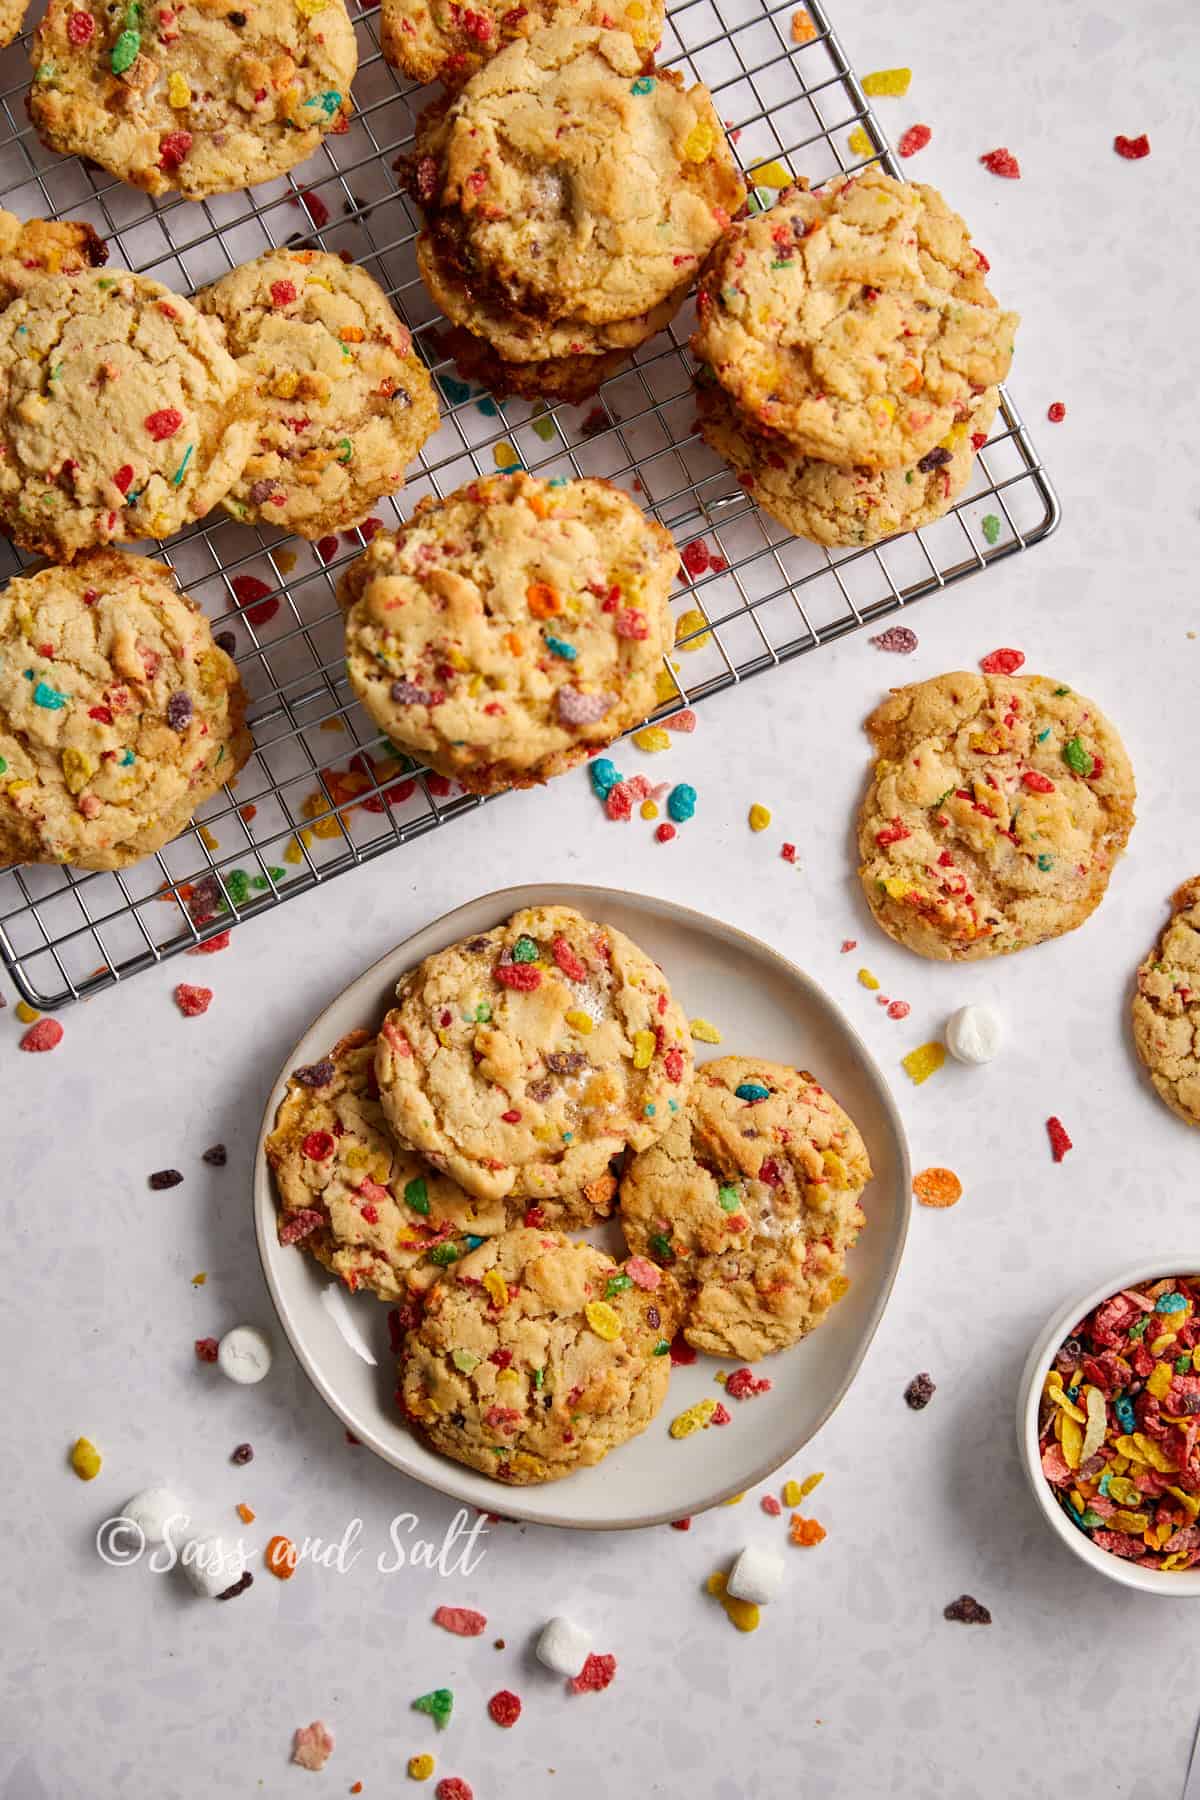 The image showcases a delightful array of Fruity Pebbles cookies presented on a cooling rack and a plate, with the scene set on a light, textured surface. The cookies are generously studded with vibrant pieces of Fruity Pebbles cereal, giving them a playful and colorful appearance. A scattering of cereal and a few marshmallows are artfully placed around the plate, enhancing the visual appeal of the homemade treats.